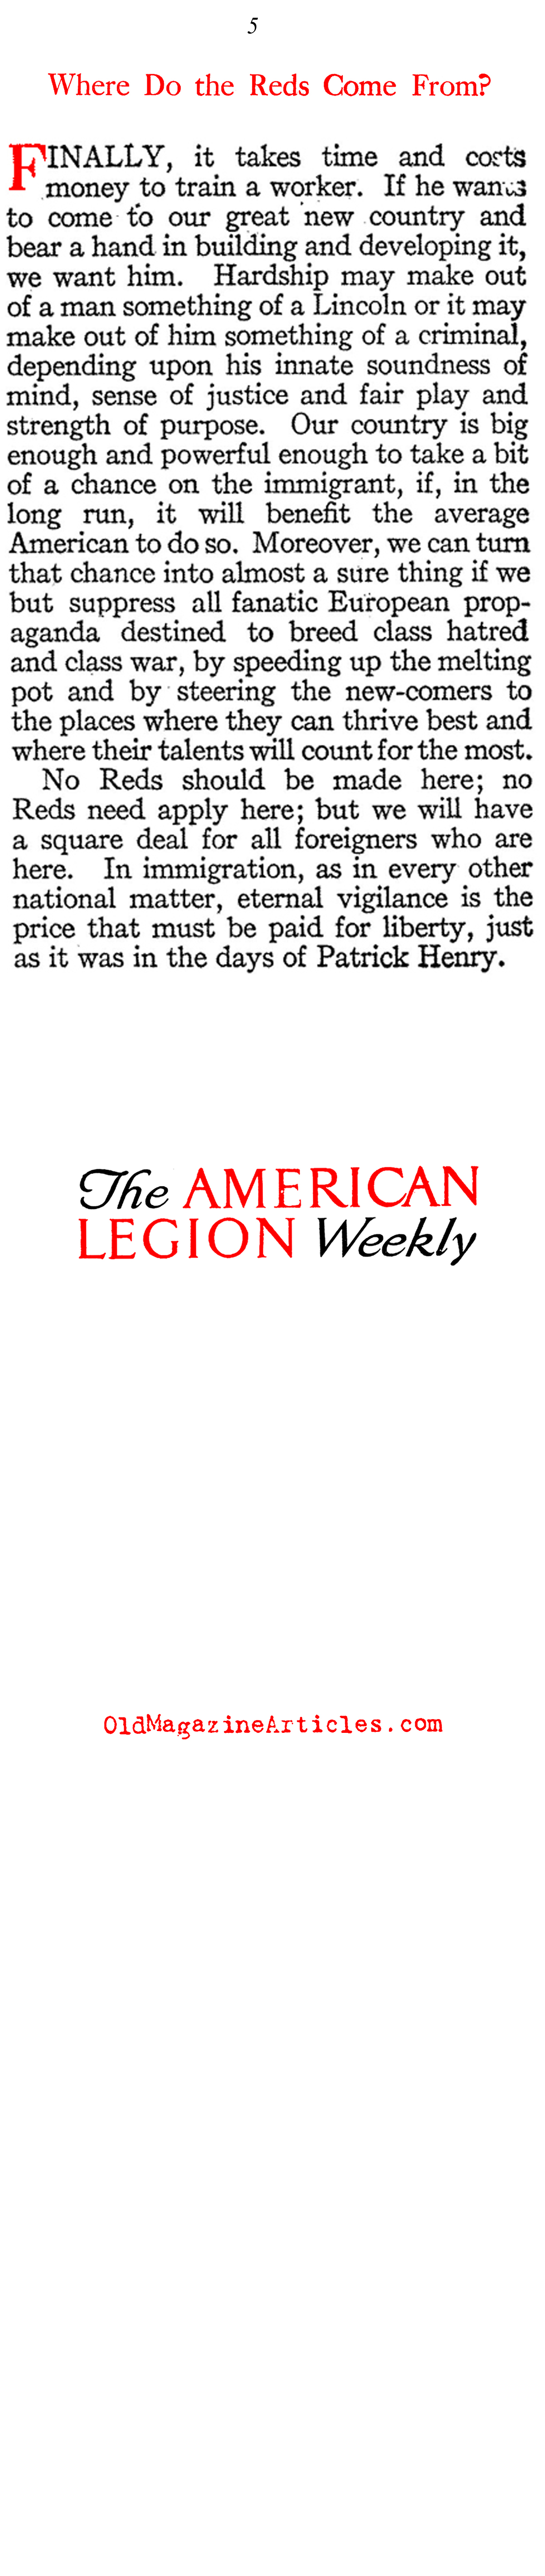 Deporting the Reds (American Legion Weekly, 1920)